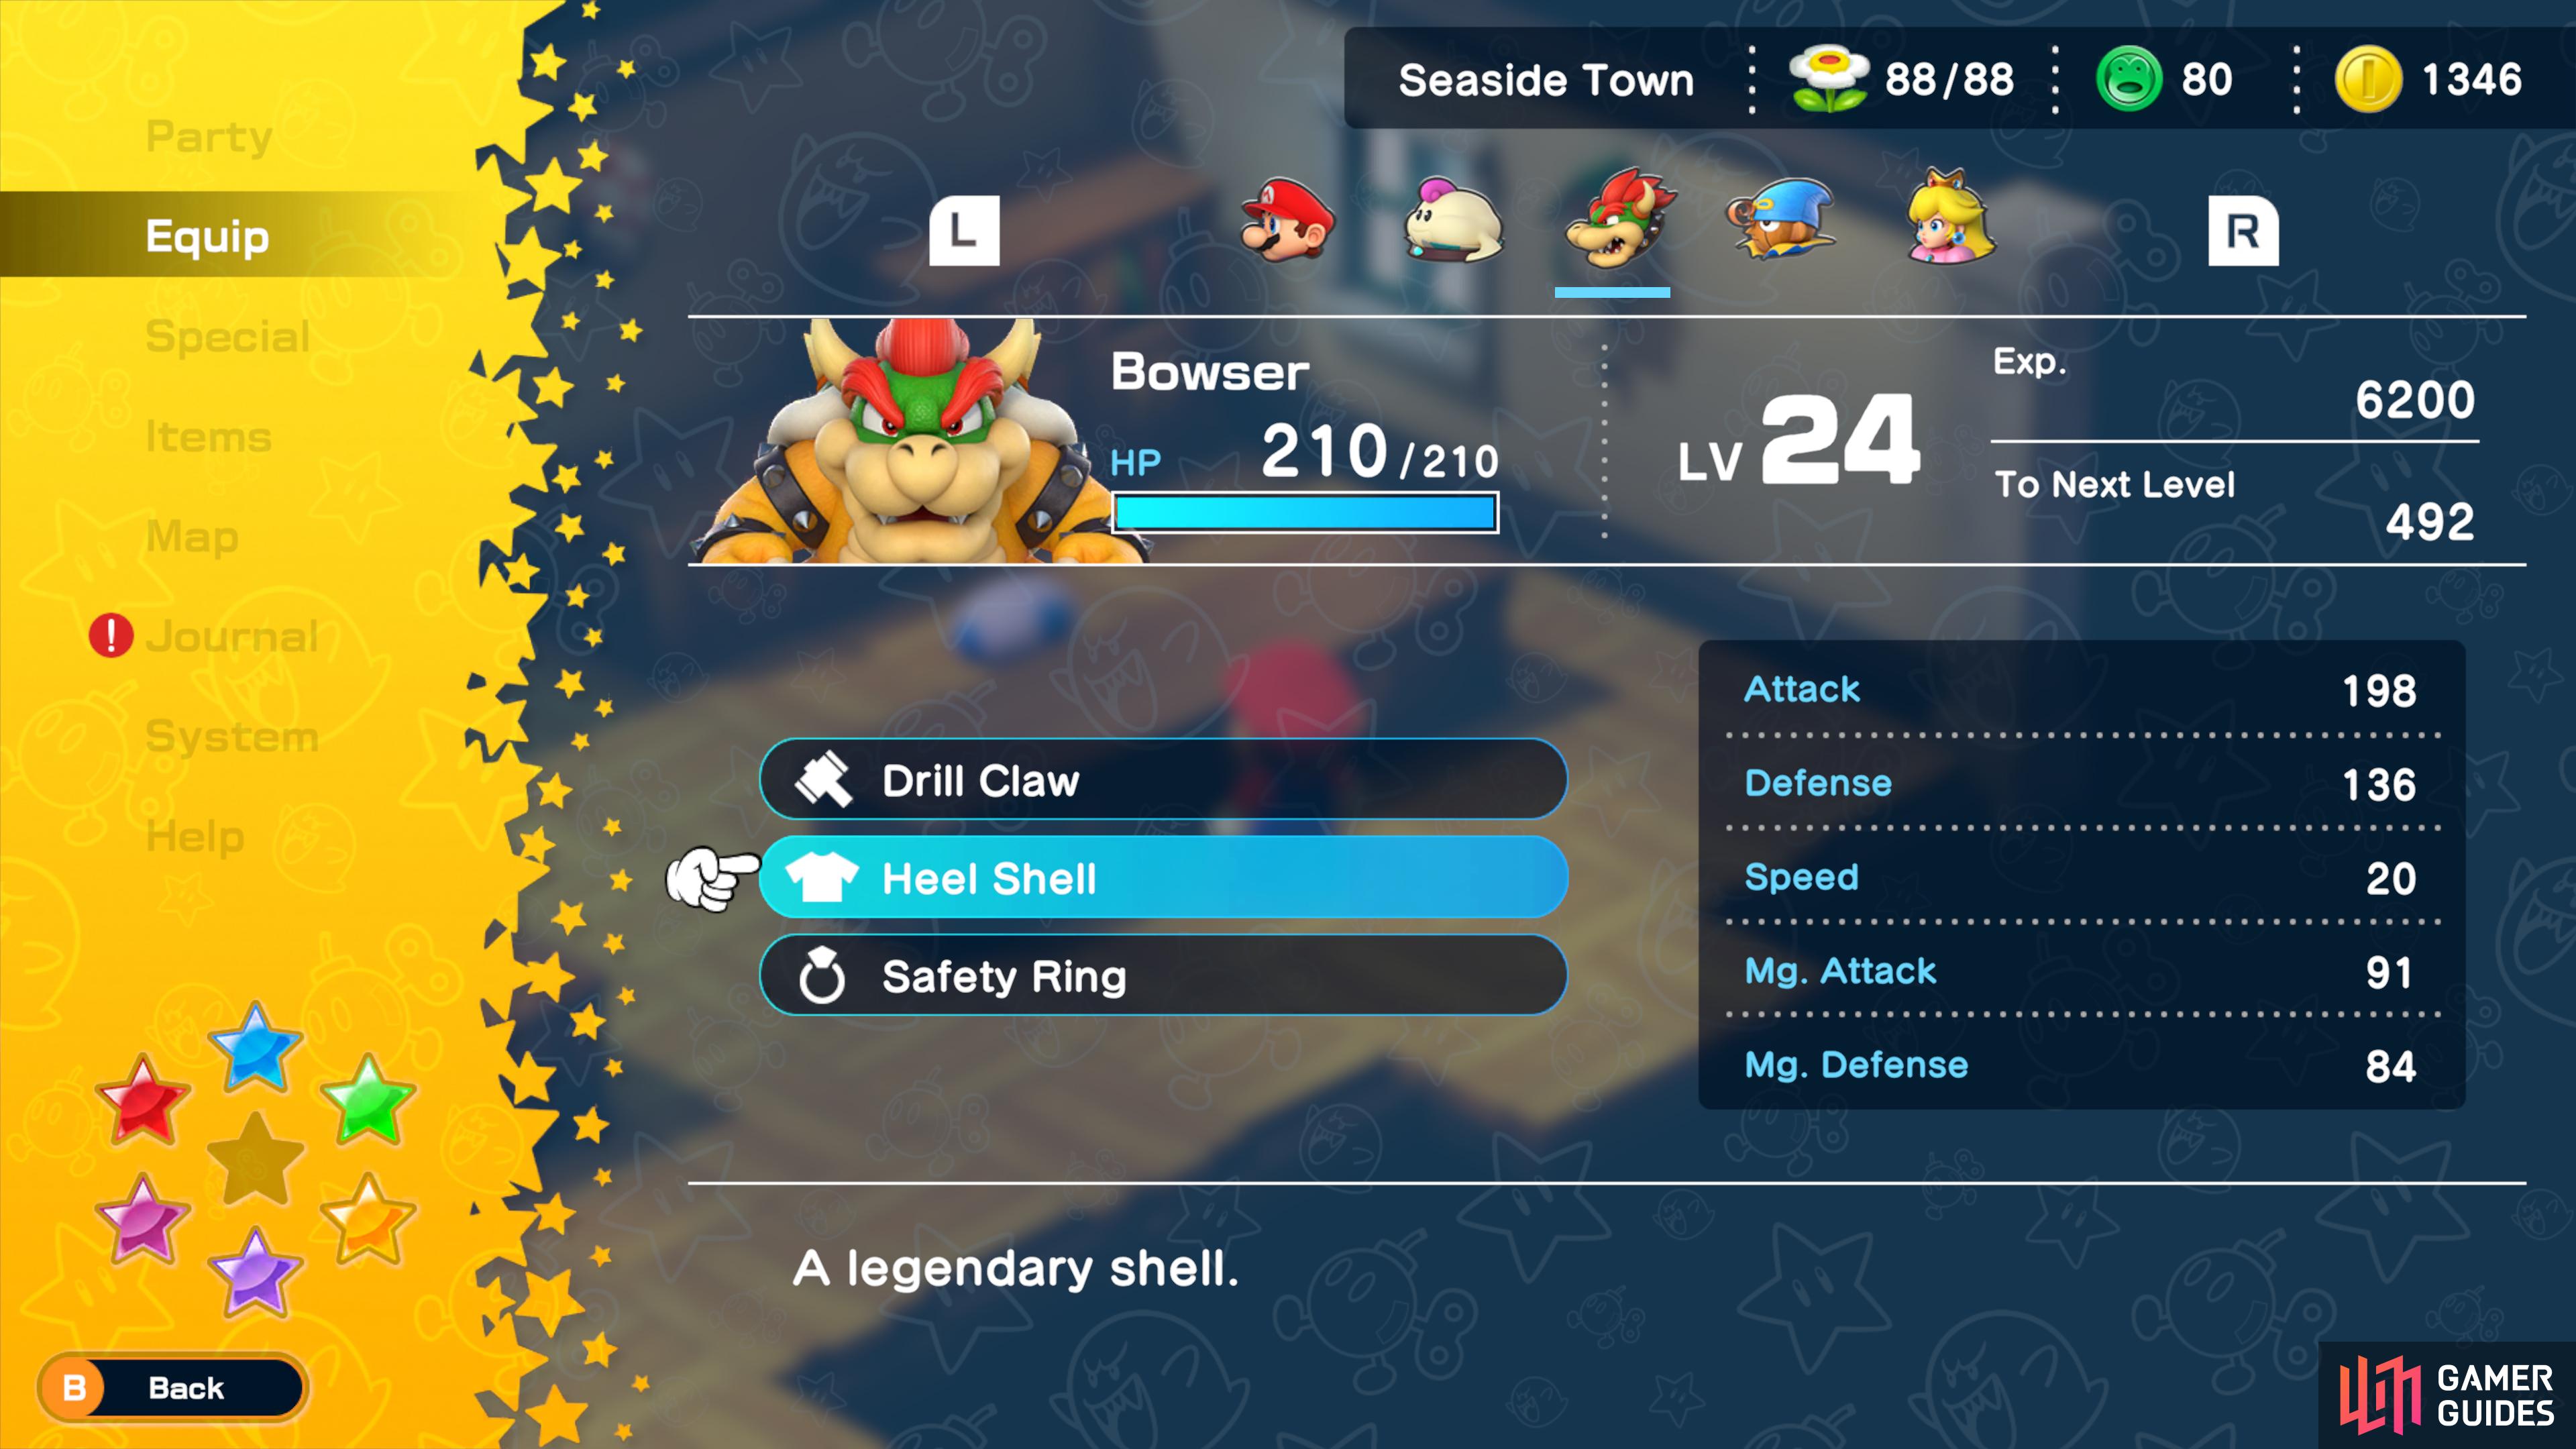 The Heel Shell is Bowser's best armor.